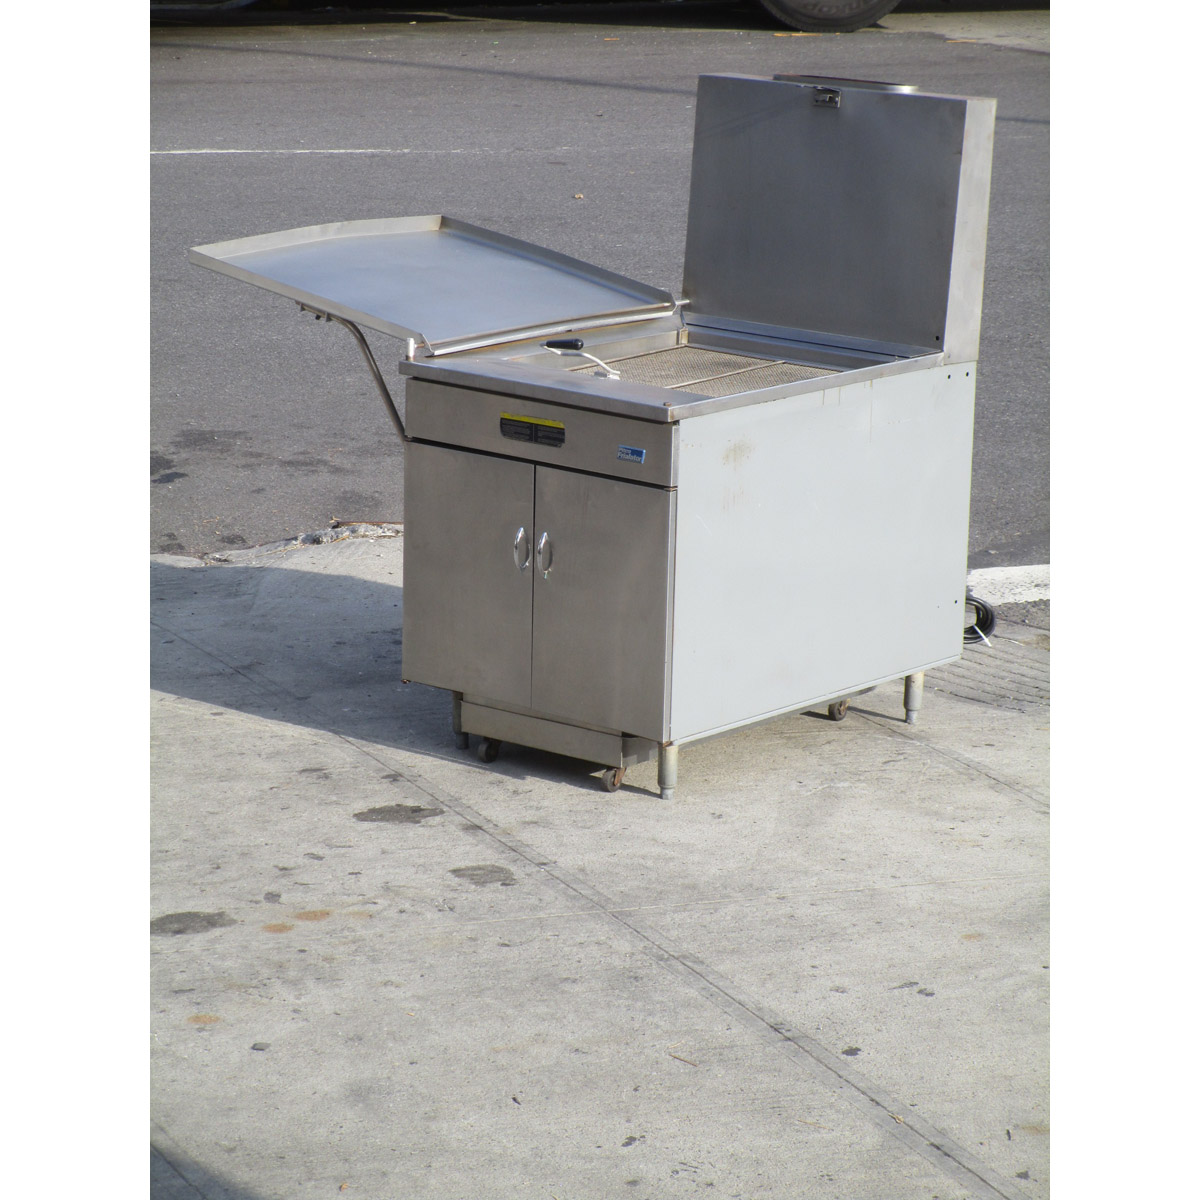 Pitco 24RUFM Gas Donut Fryer with Filter, Very Good Condition image 1